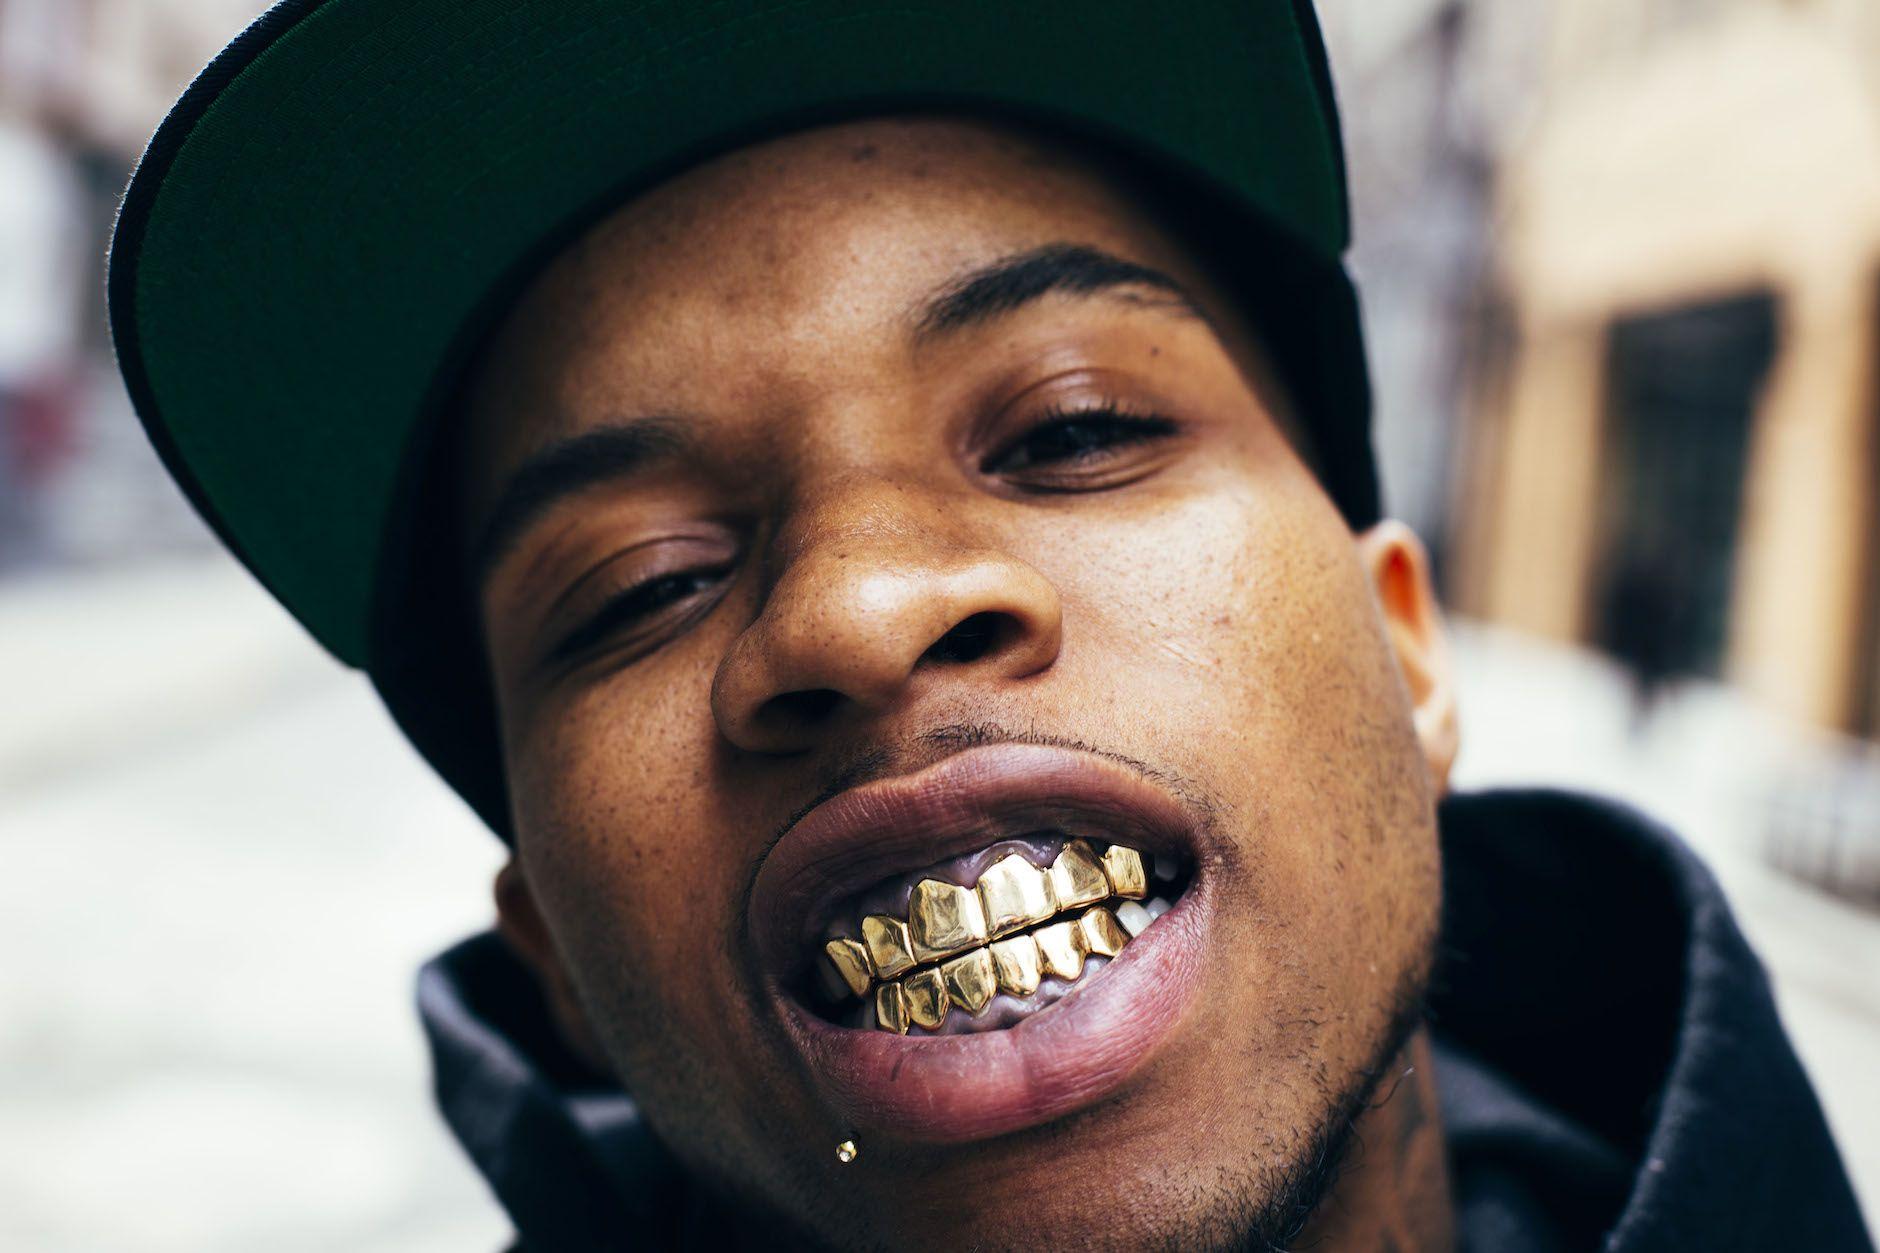 Tory Lanez Wallpapers HD Collection For Free Download.